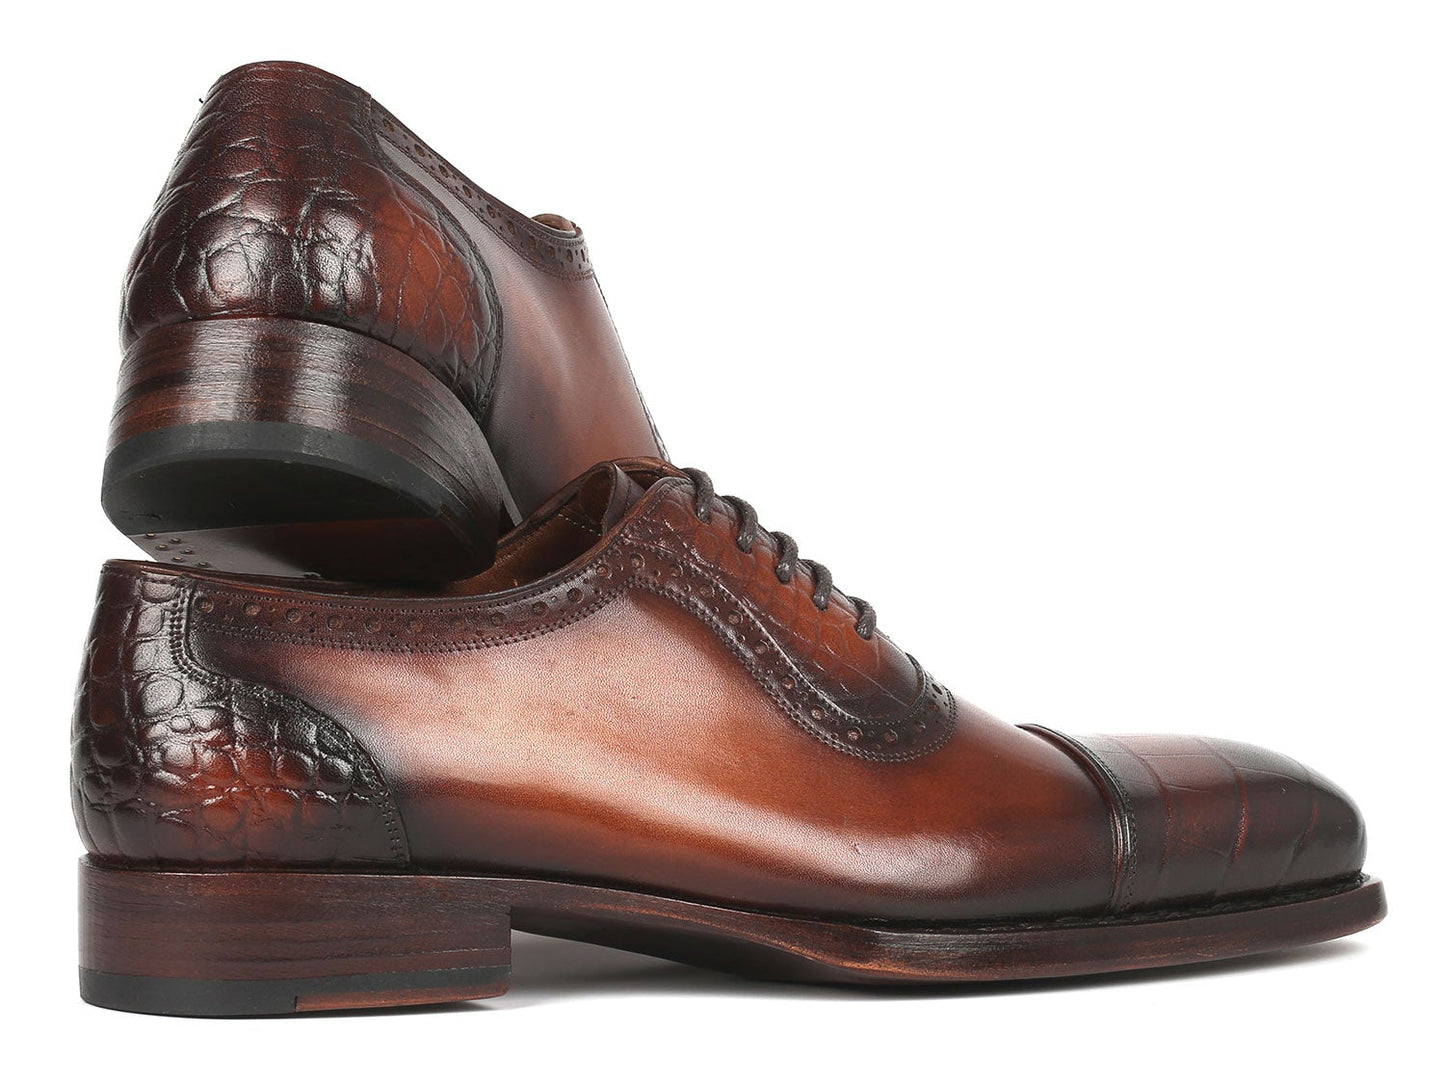 Paul Parkman Goodyear Welted Cap Toe Oxfords Brown (ID#9482-BRW)